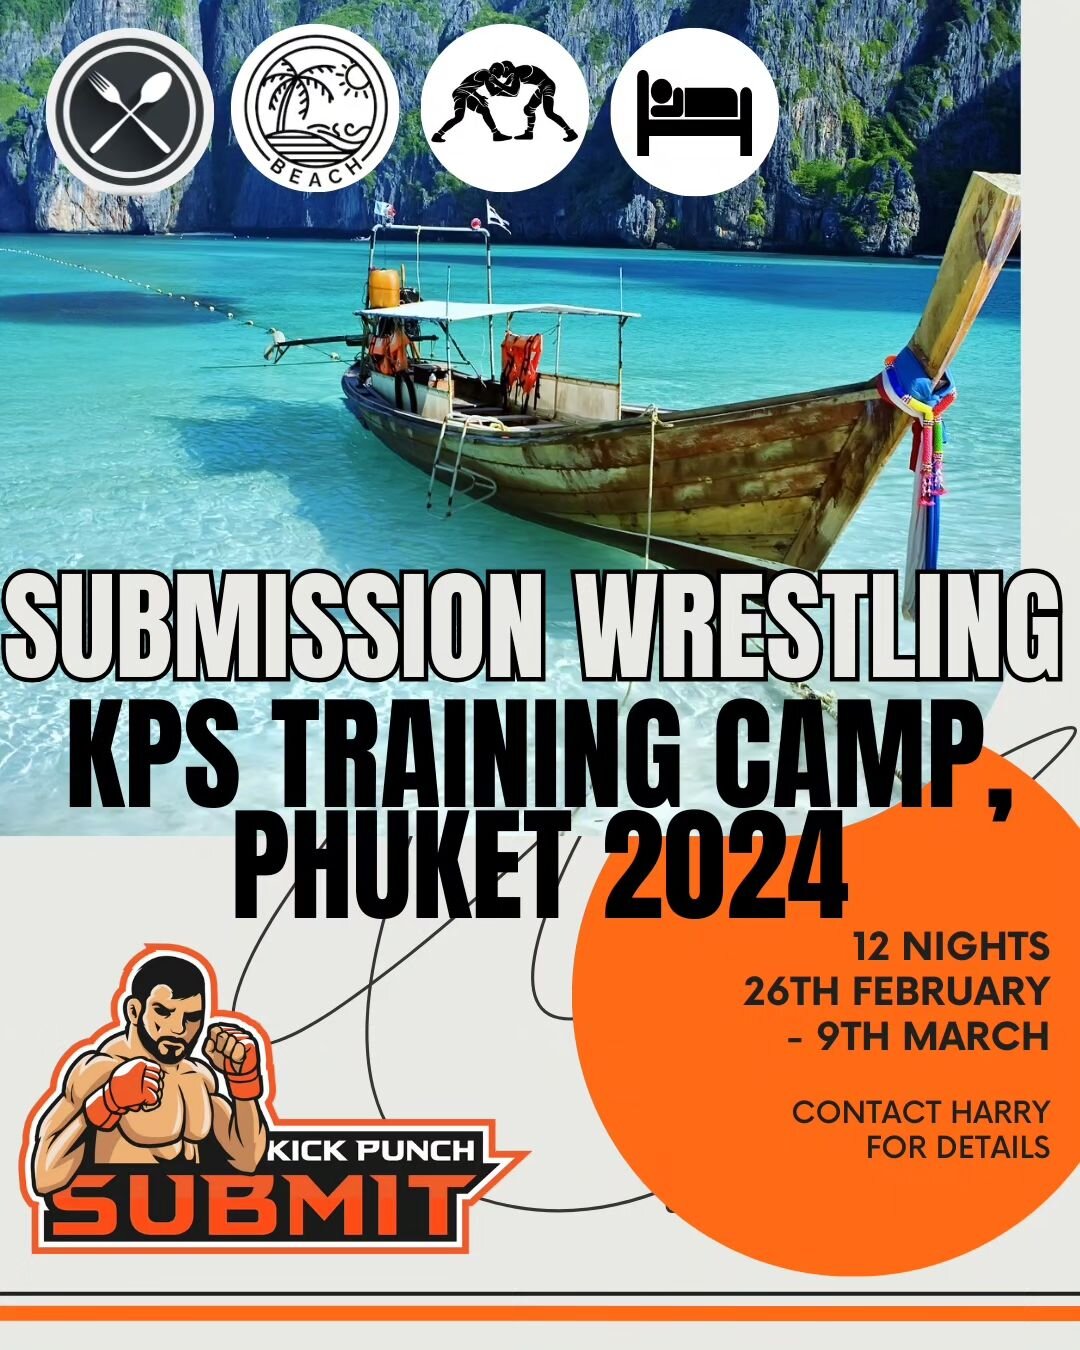 Starting 2024 off with a bang. Some members of KPS are going to Phuket, Thailand for a training camp in February.